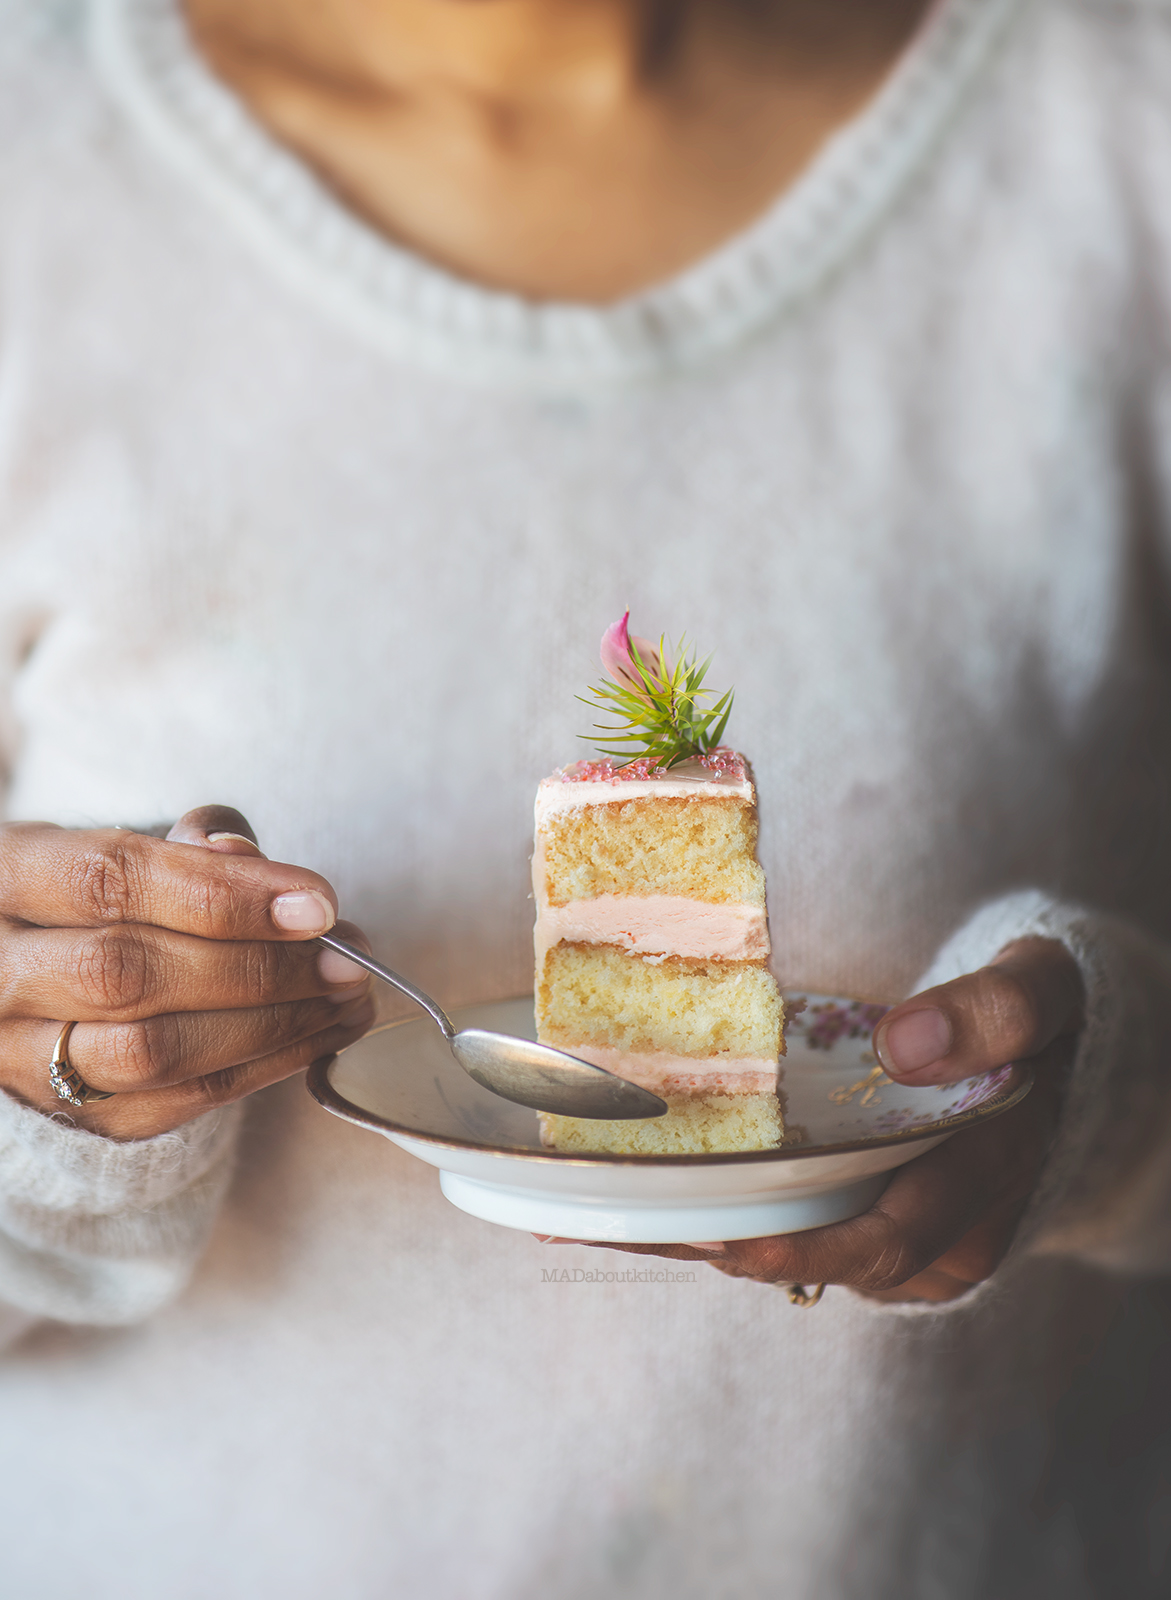 Genoise or Genoese cake or Genovese cake is an Italian sponge cake. This rich, delicate cake forms the basis for many filled, frosted, and glazed cakes.